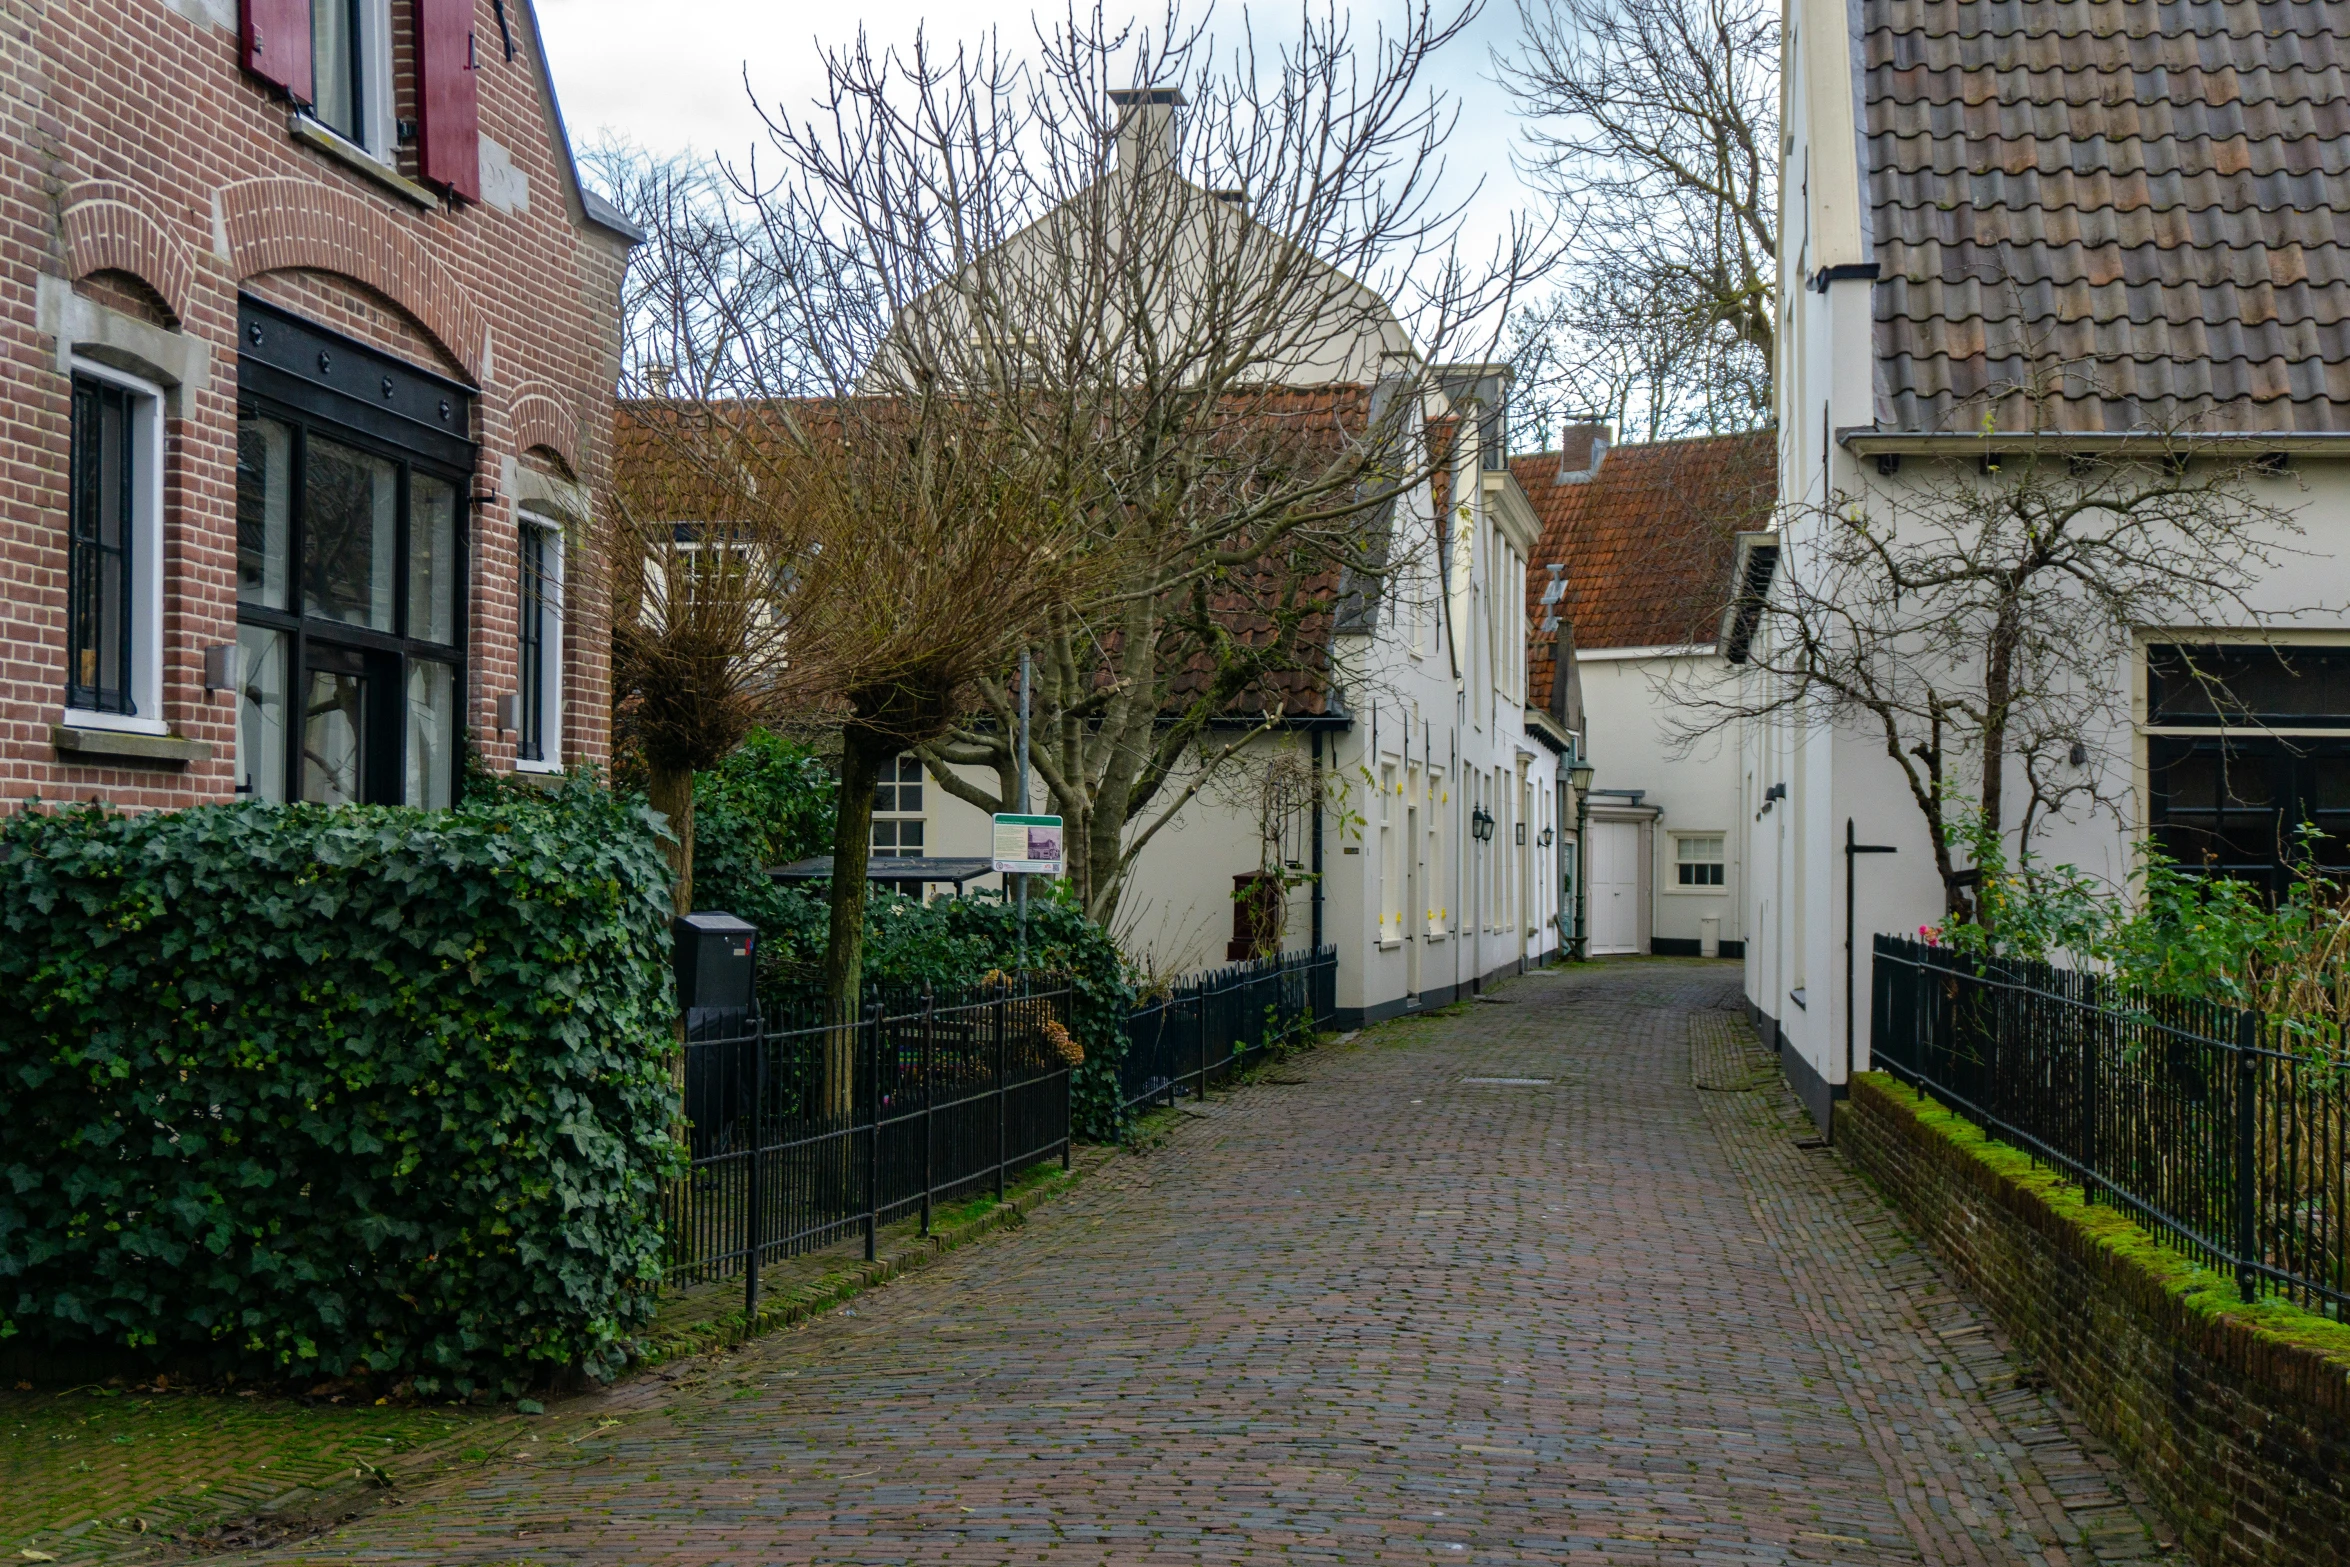 the street is lined with brick walkways